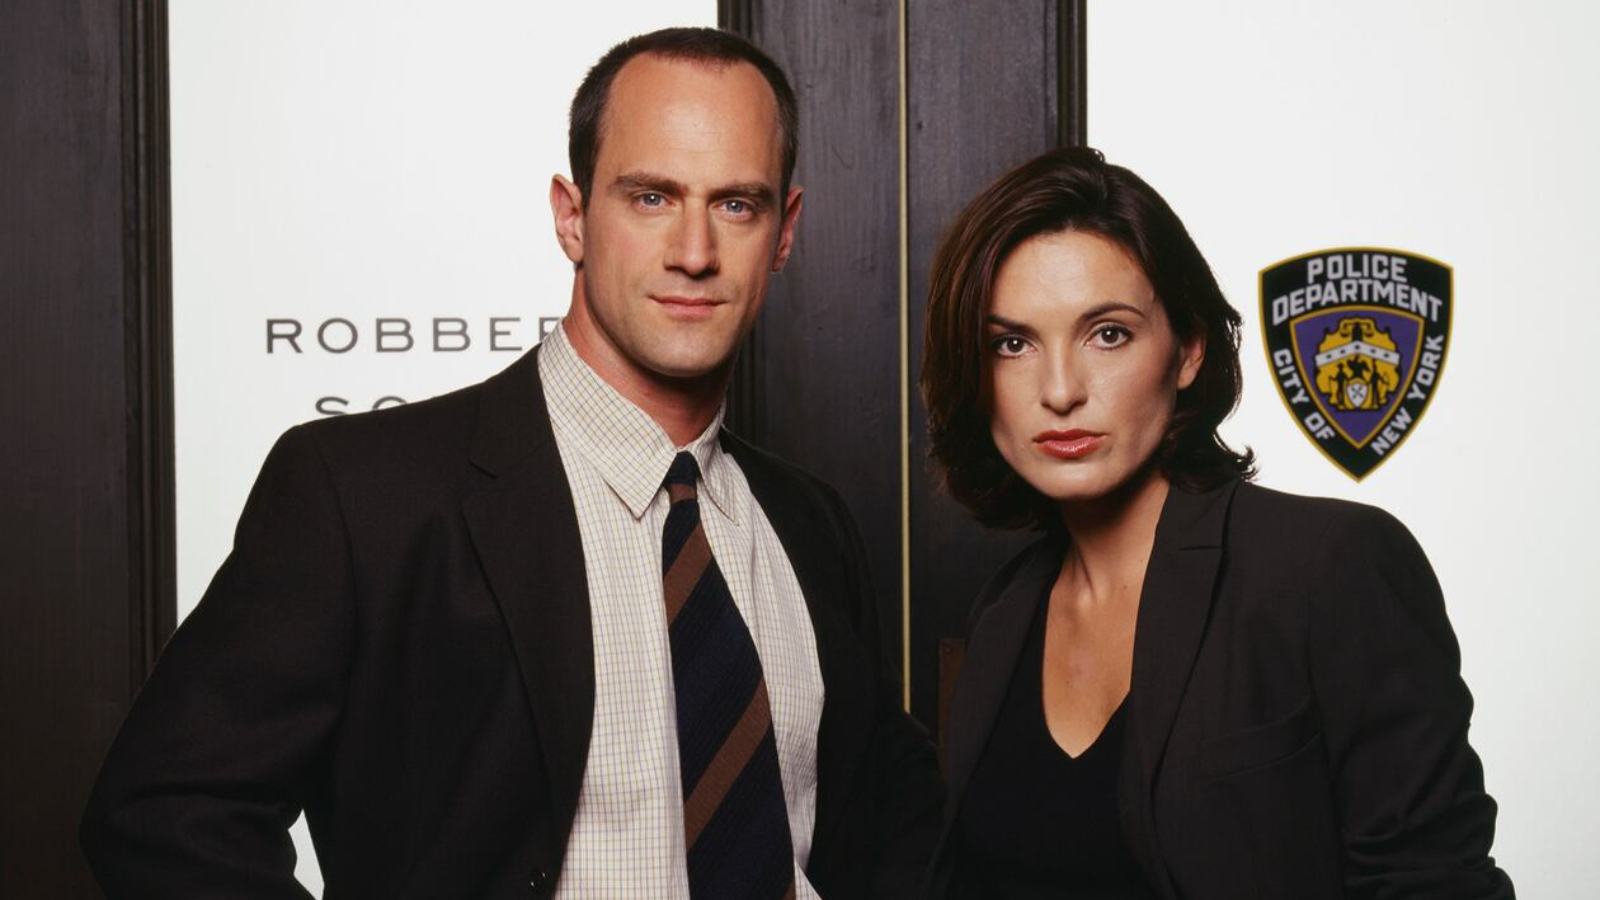 Chris Meloni and Mariska Hargitay as Detectives Stabler and Benson in 'Law and Order: SVU'